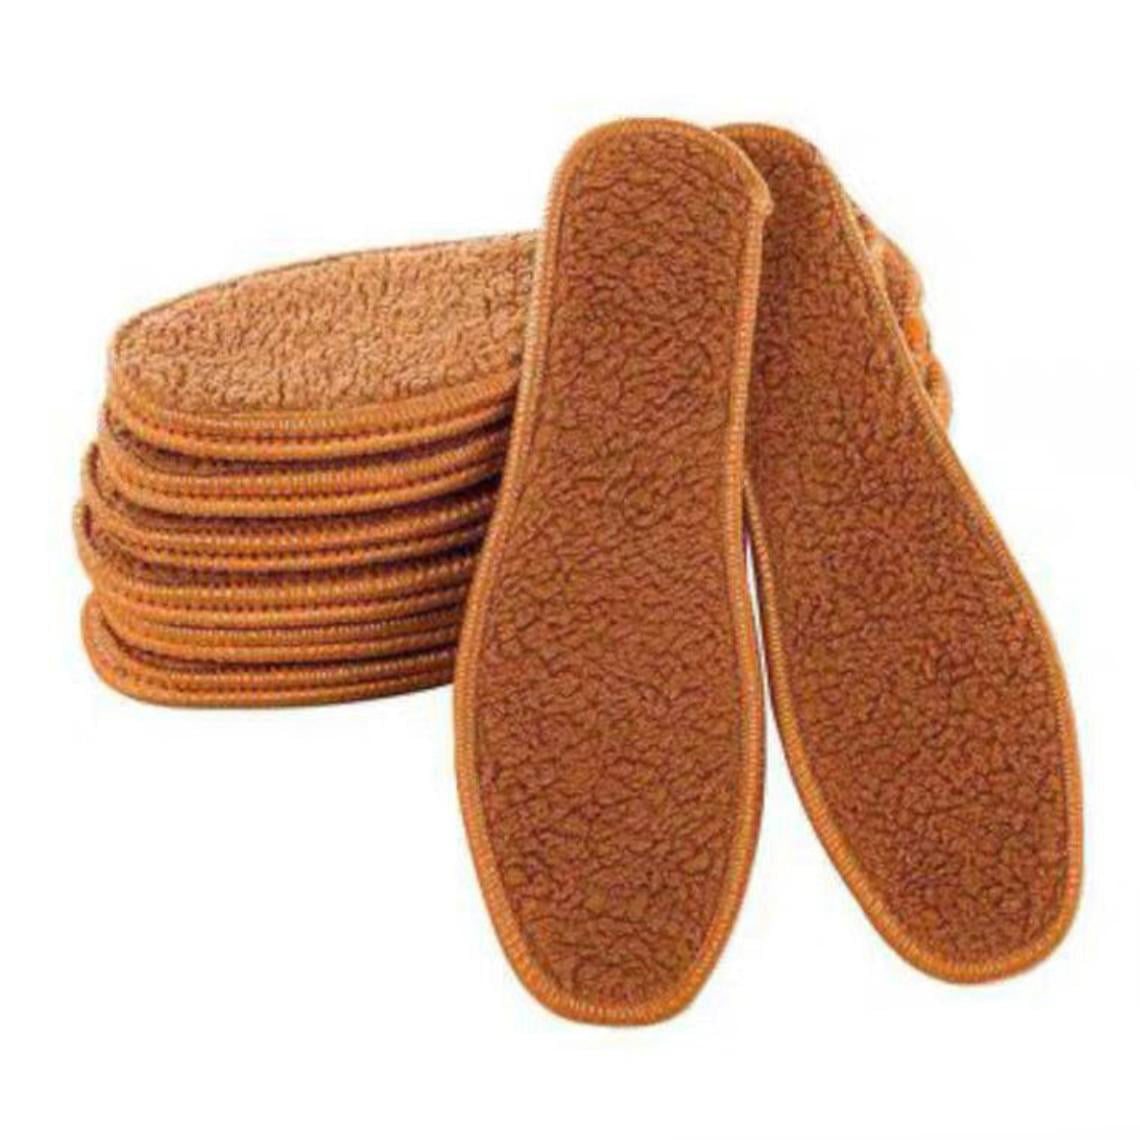 One Size Fits All Insole 4 Pairs of SOFT FLEECE WOOLEN INSOLES Cut-to-fit 